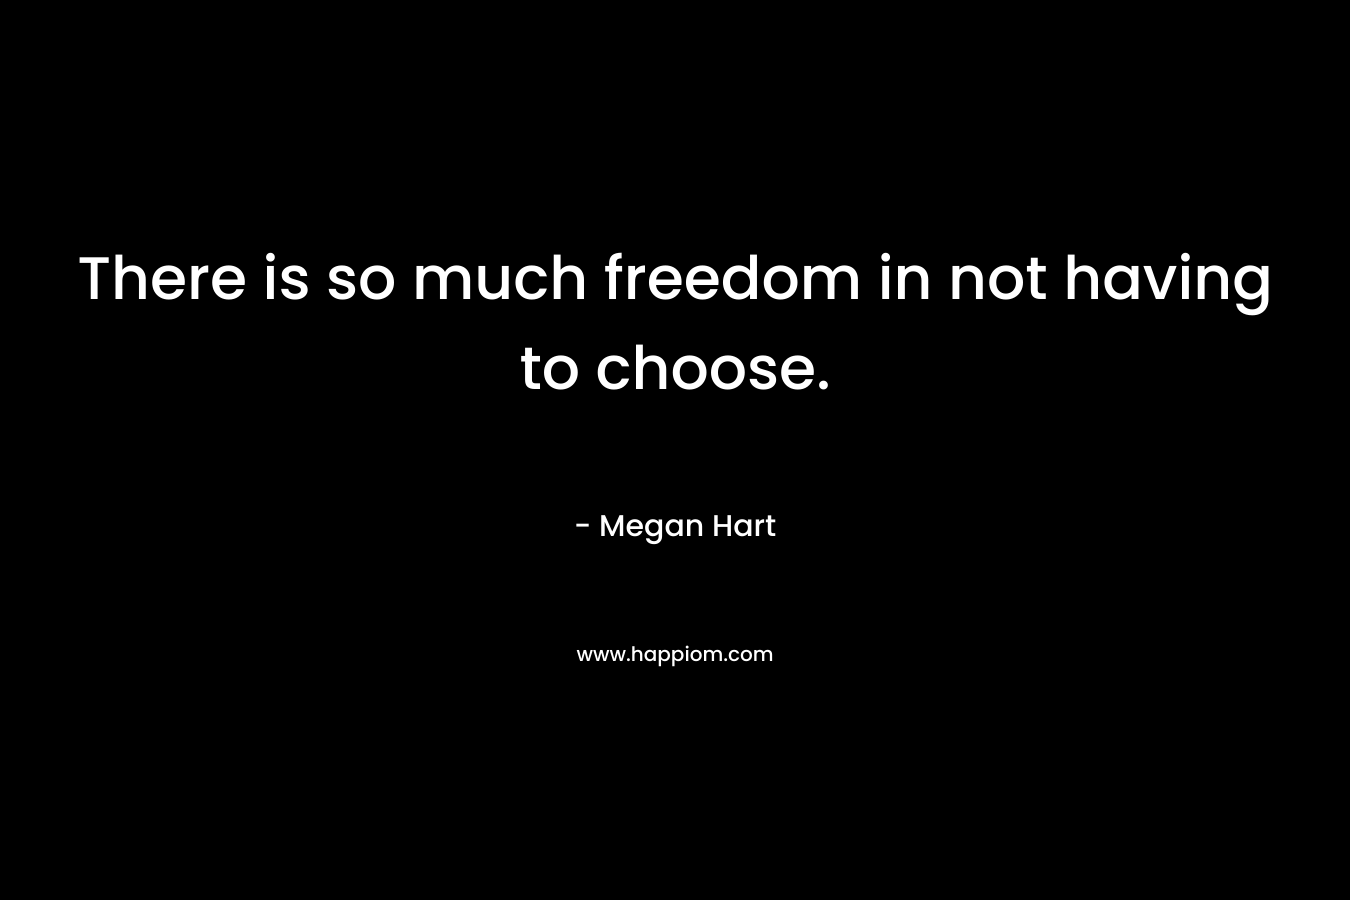 There is so much freedom in not having to choose.